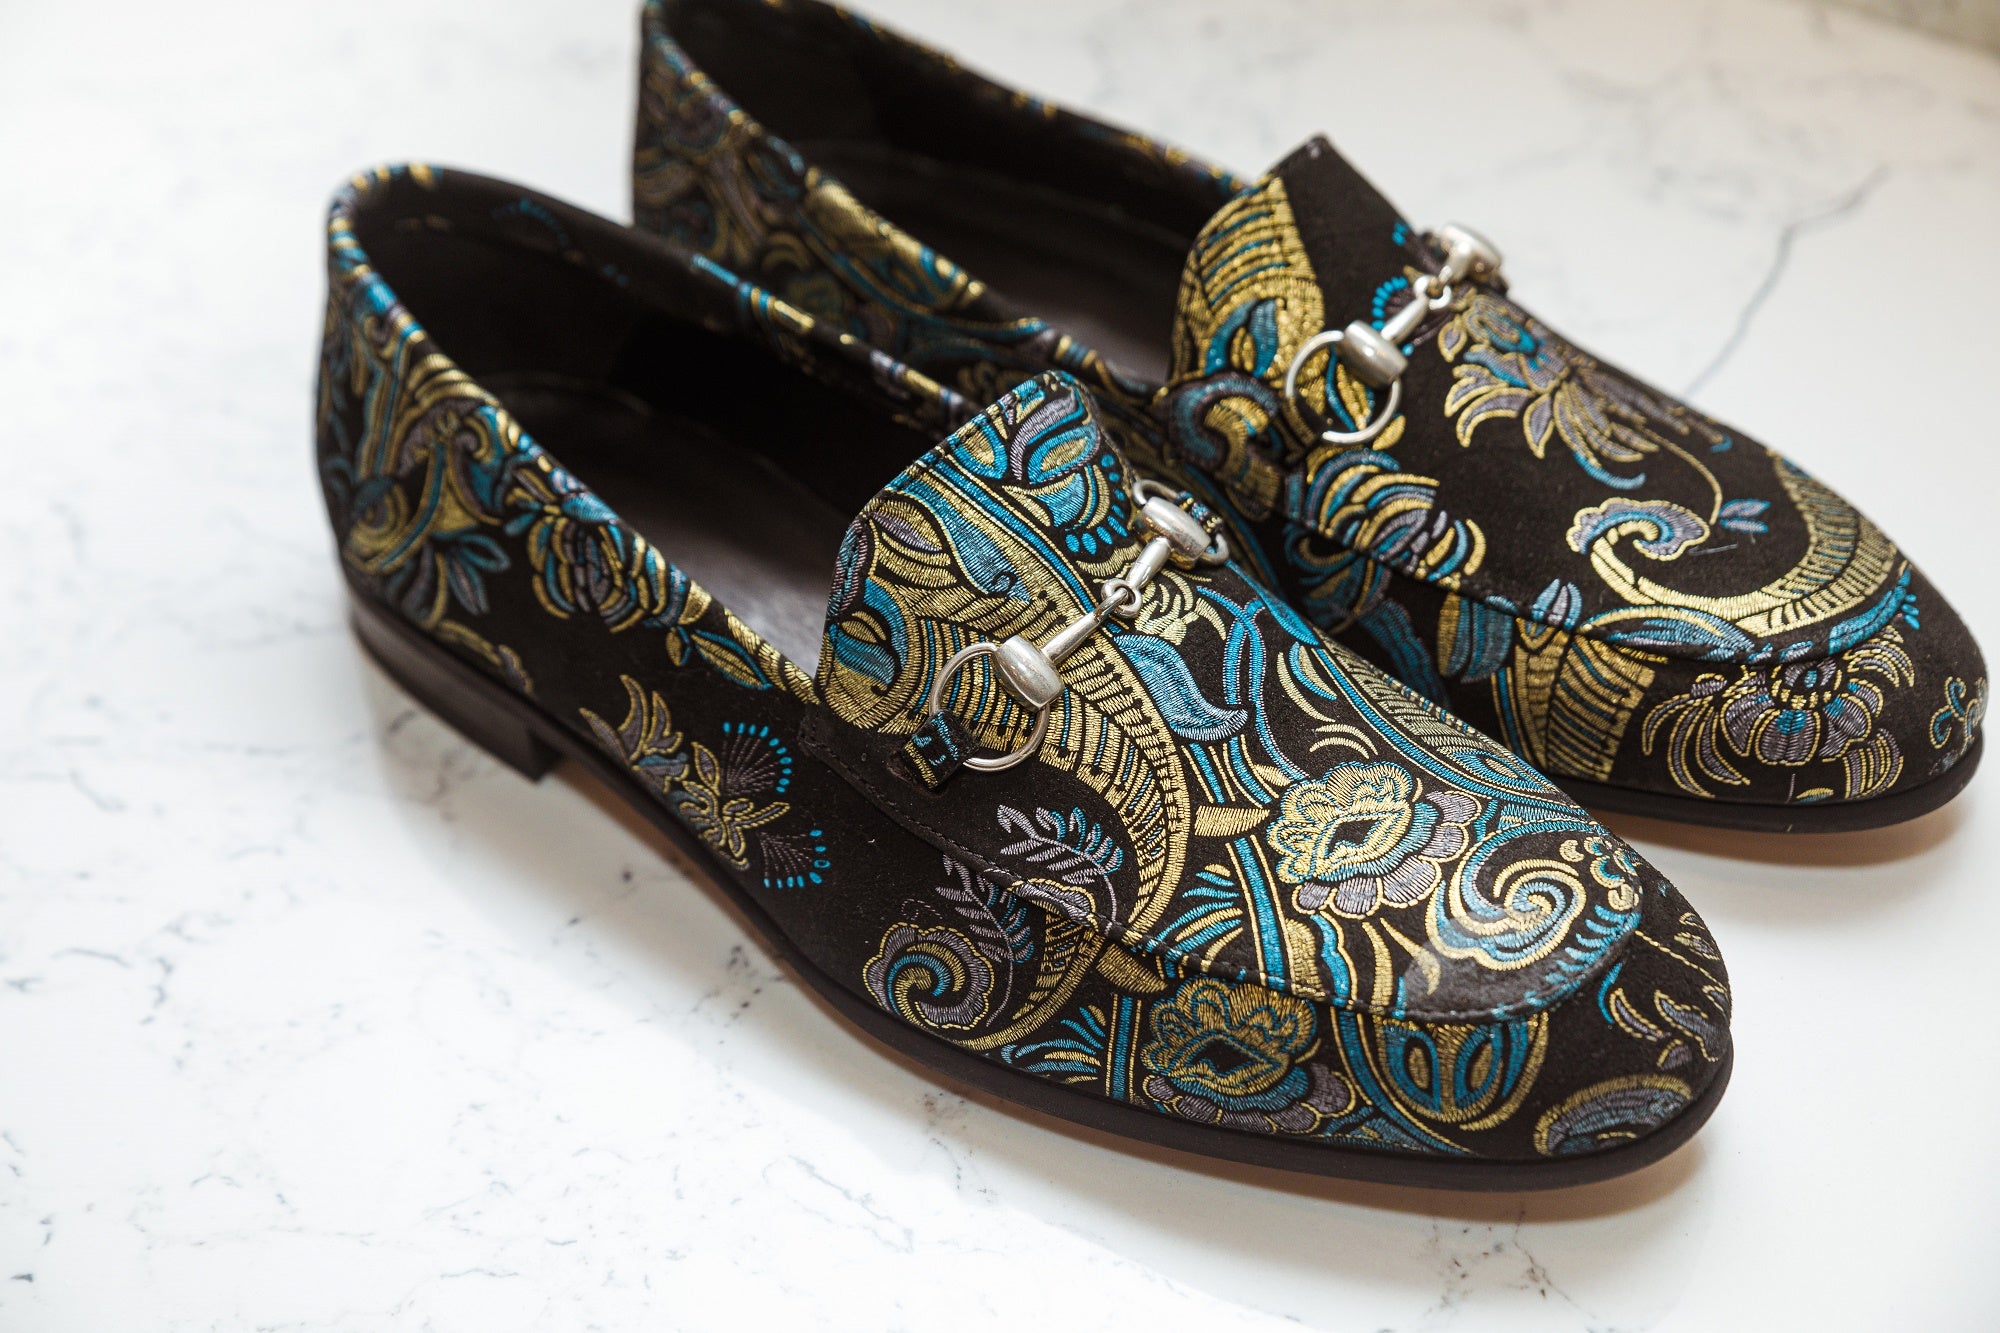 The Bohemia Loafers - Loafers by Urbbana